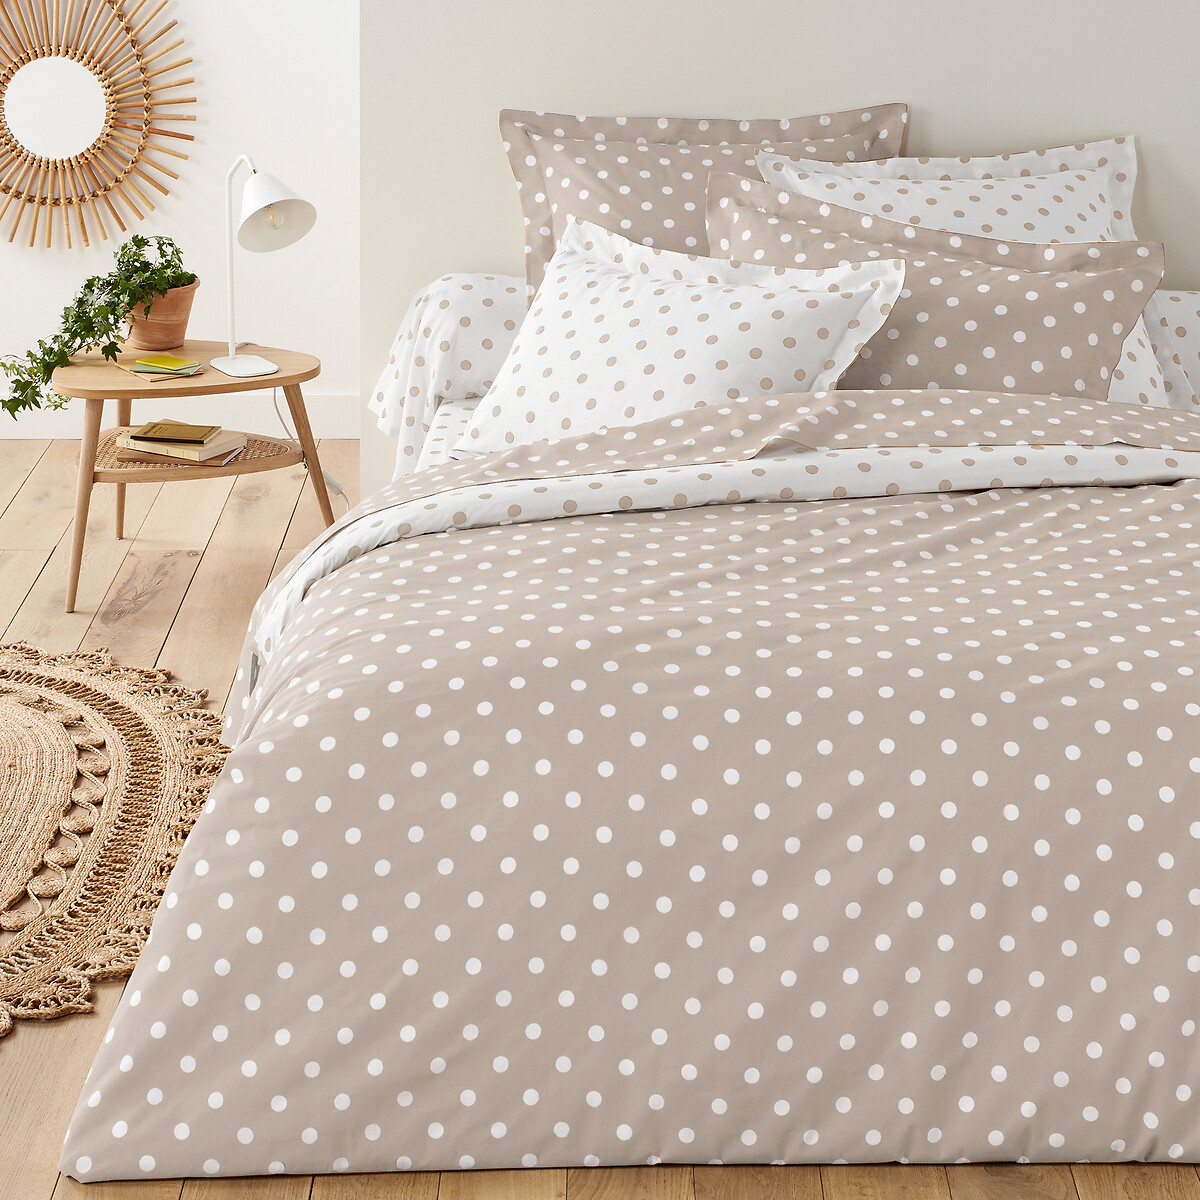 Clarisse Cotton Duvet Cover In Polka, Grey And Beige Duvet Cover